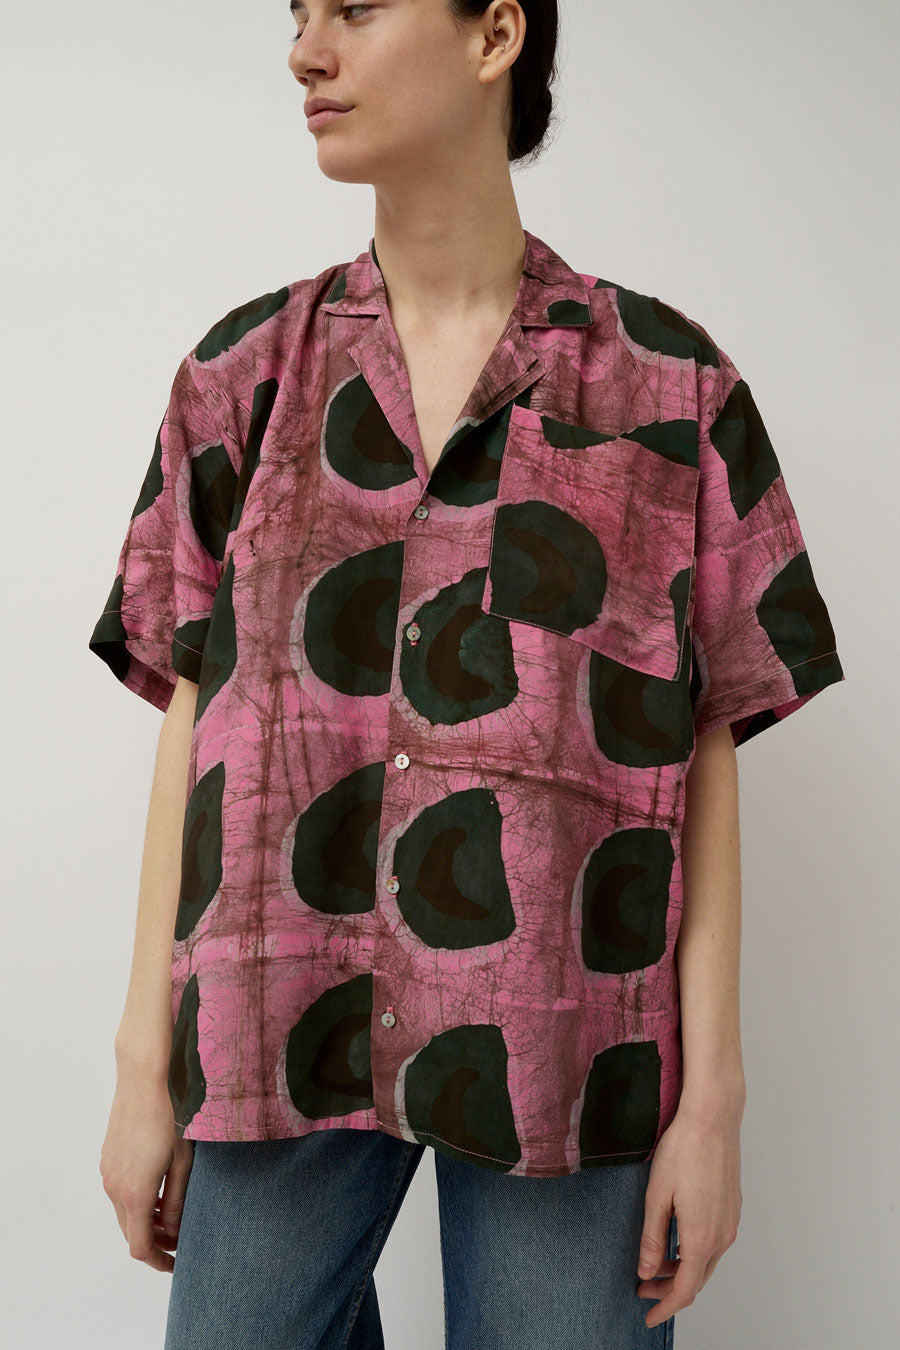 Osei Duro Holiday Shirt in Tunnel of Love